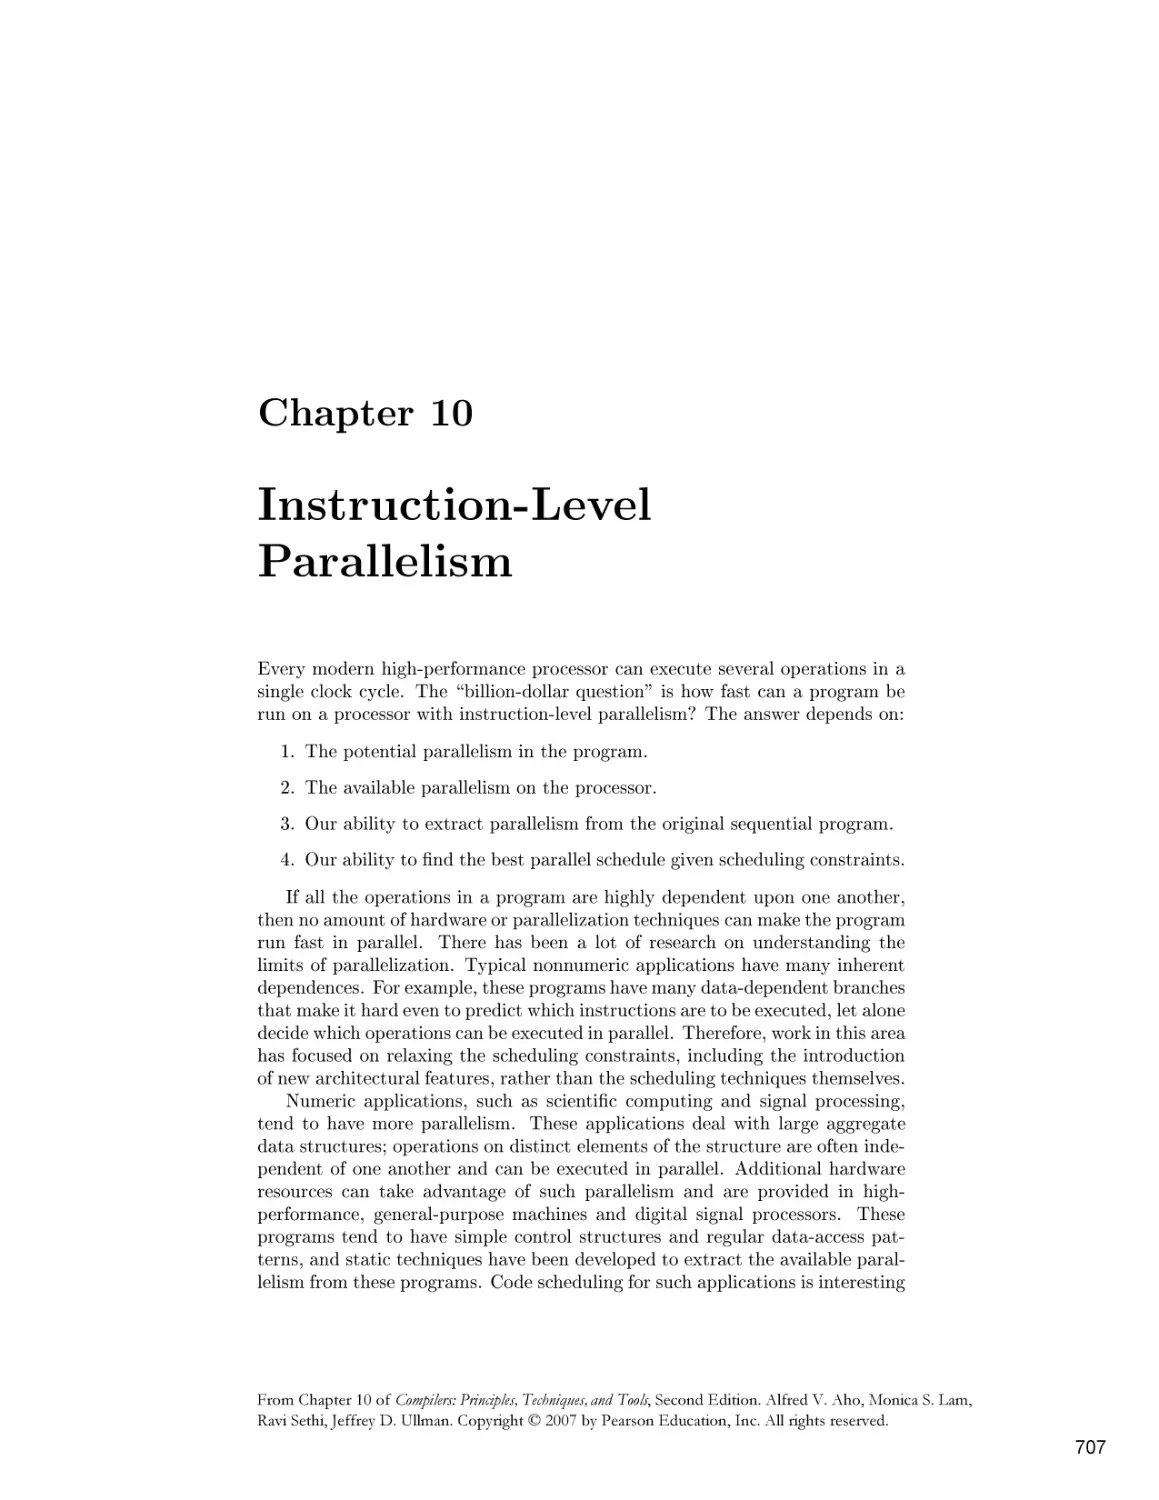 Chapter 10. Instruction-Level Parallelism